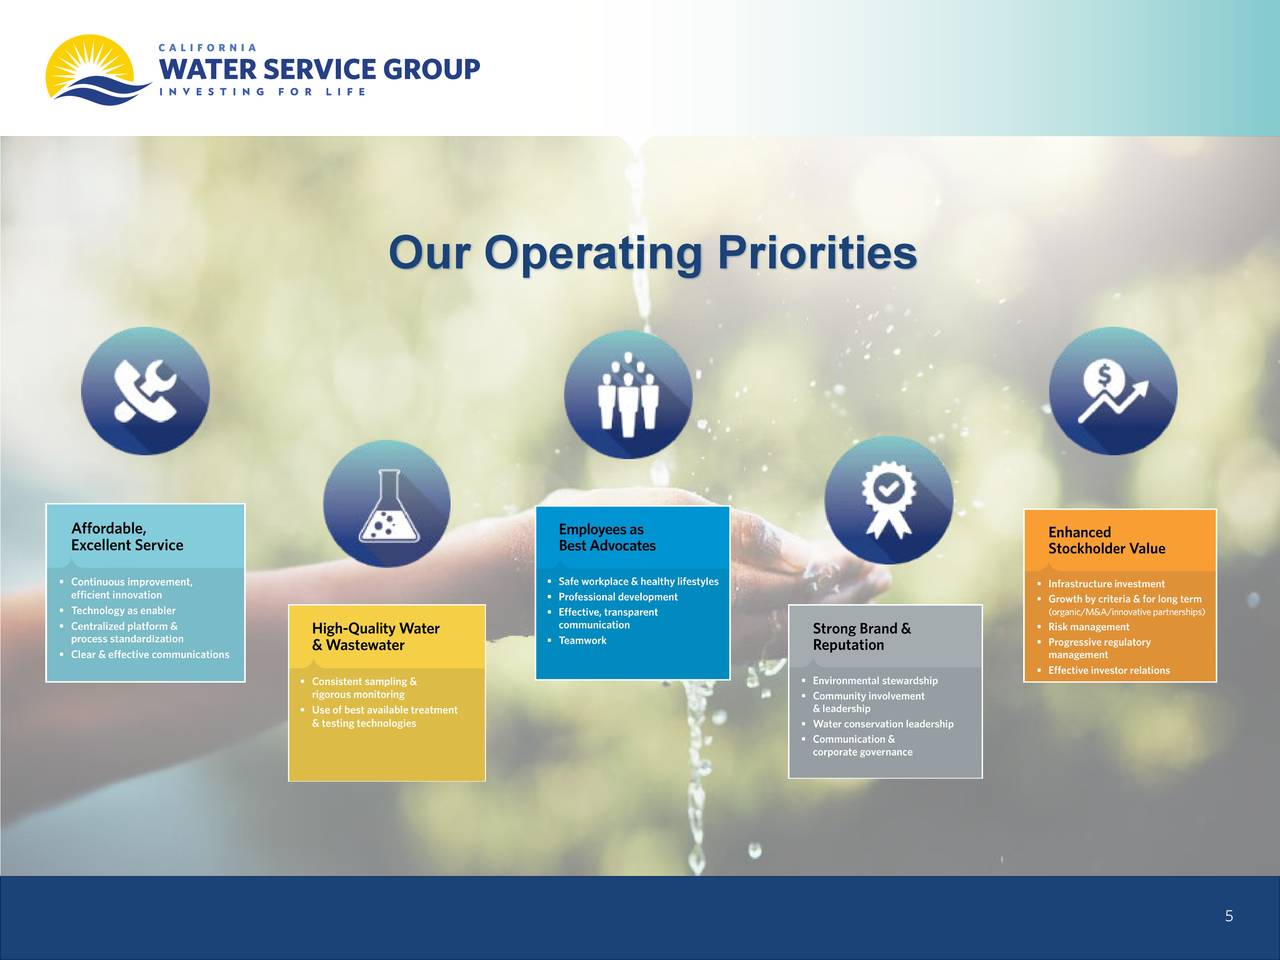 Our Operating Priorities